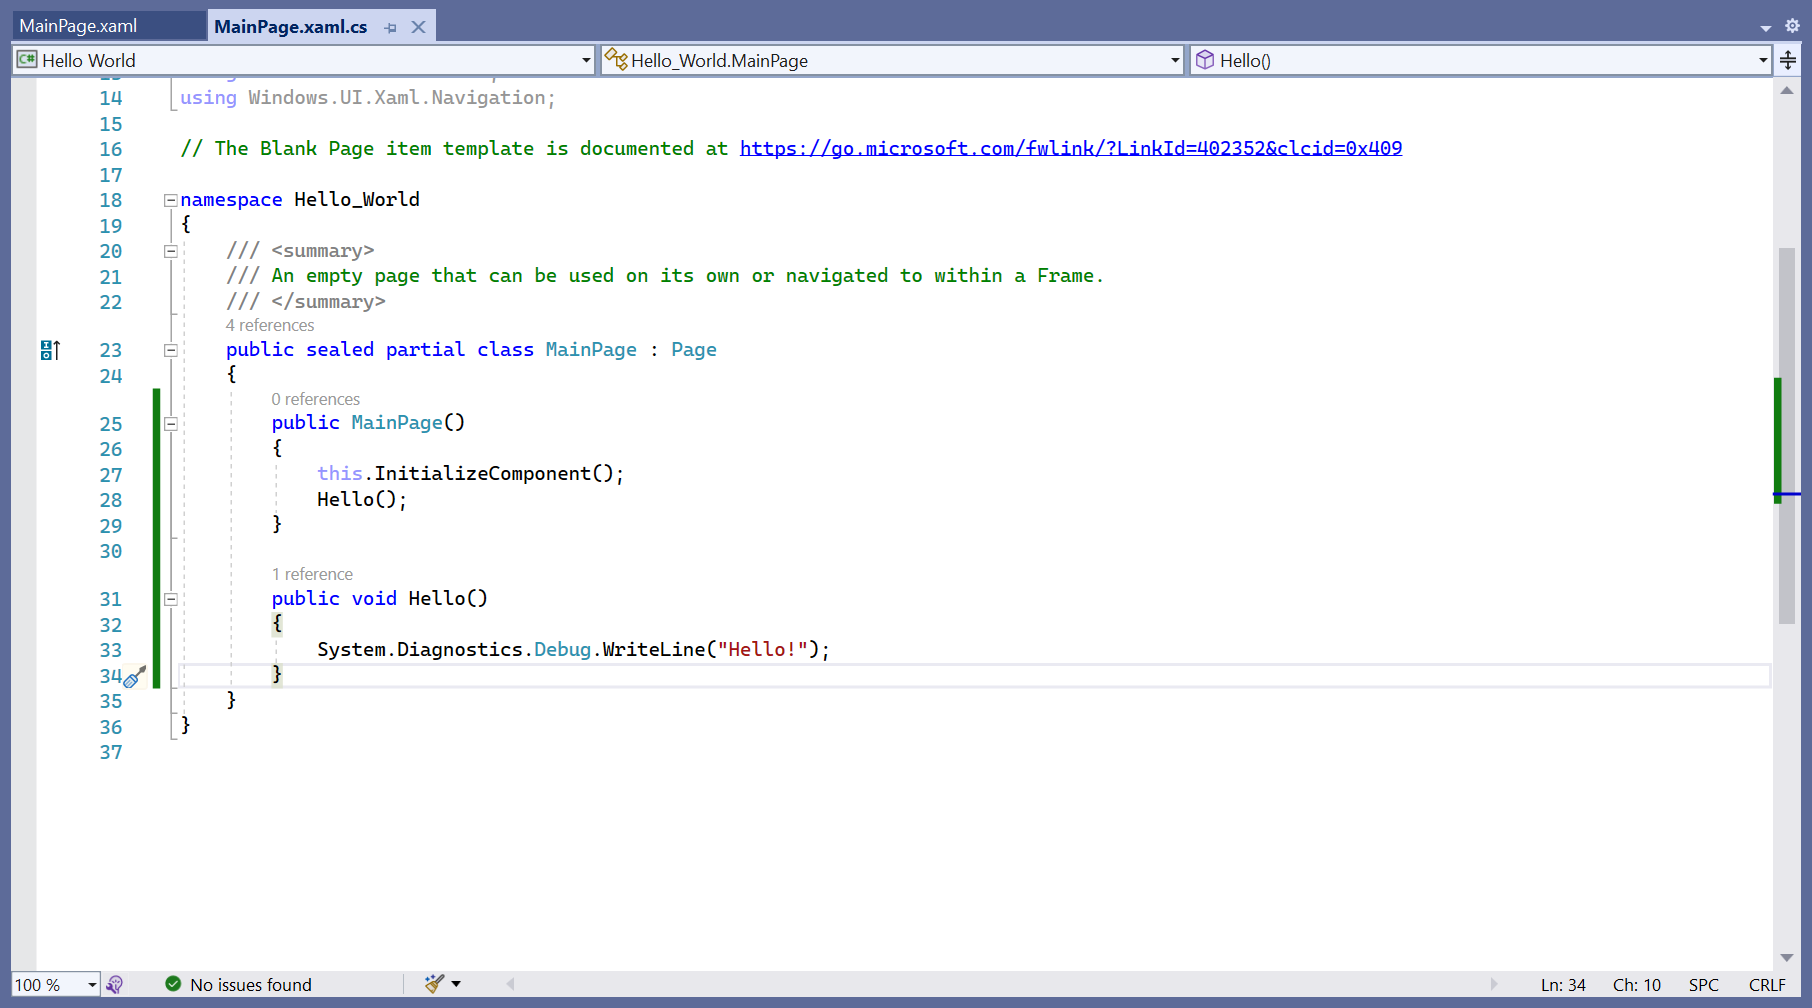 Screenshot of the editor window in Visual Studio. Sample code from the writeline steps from above is shown.